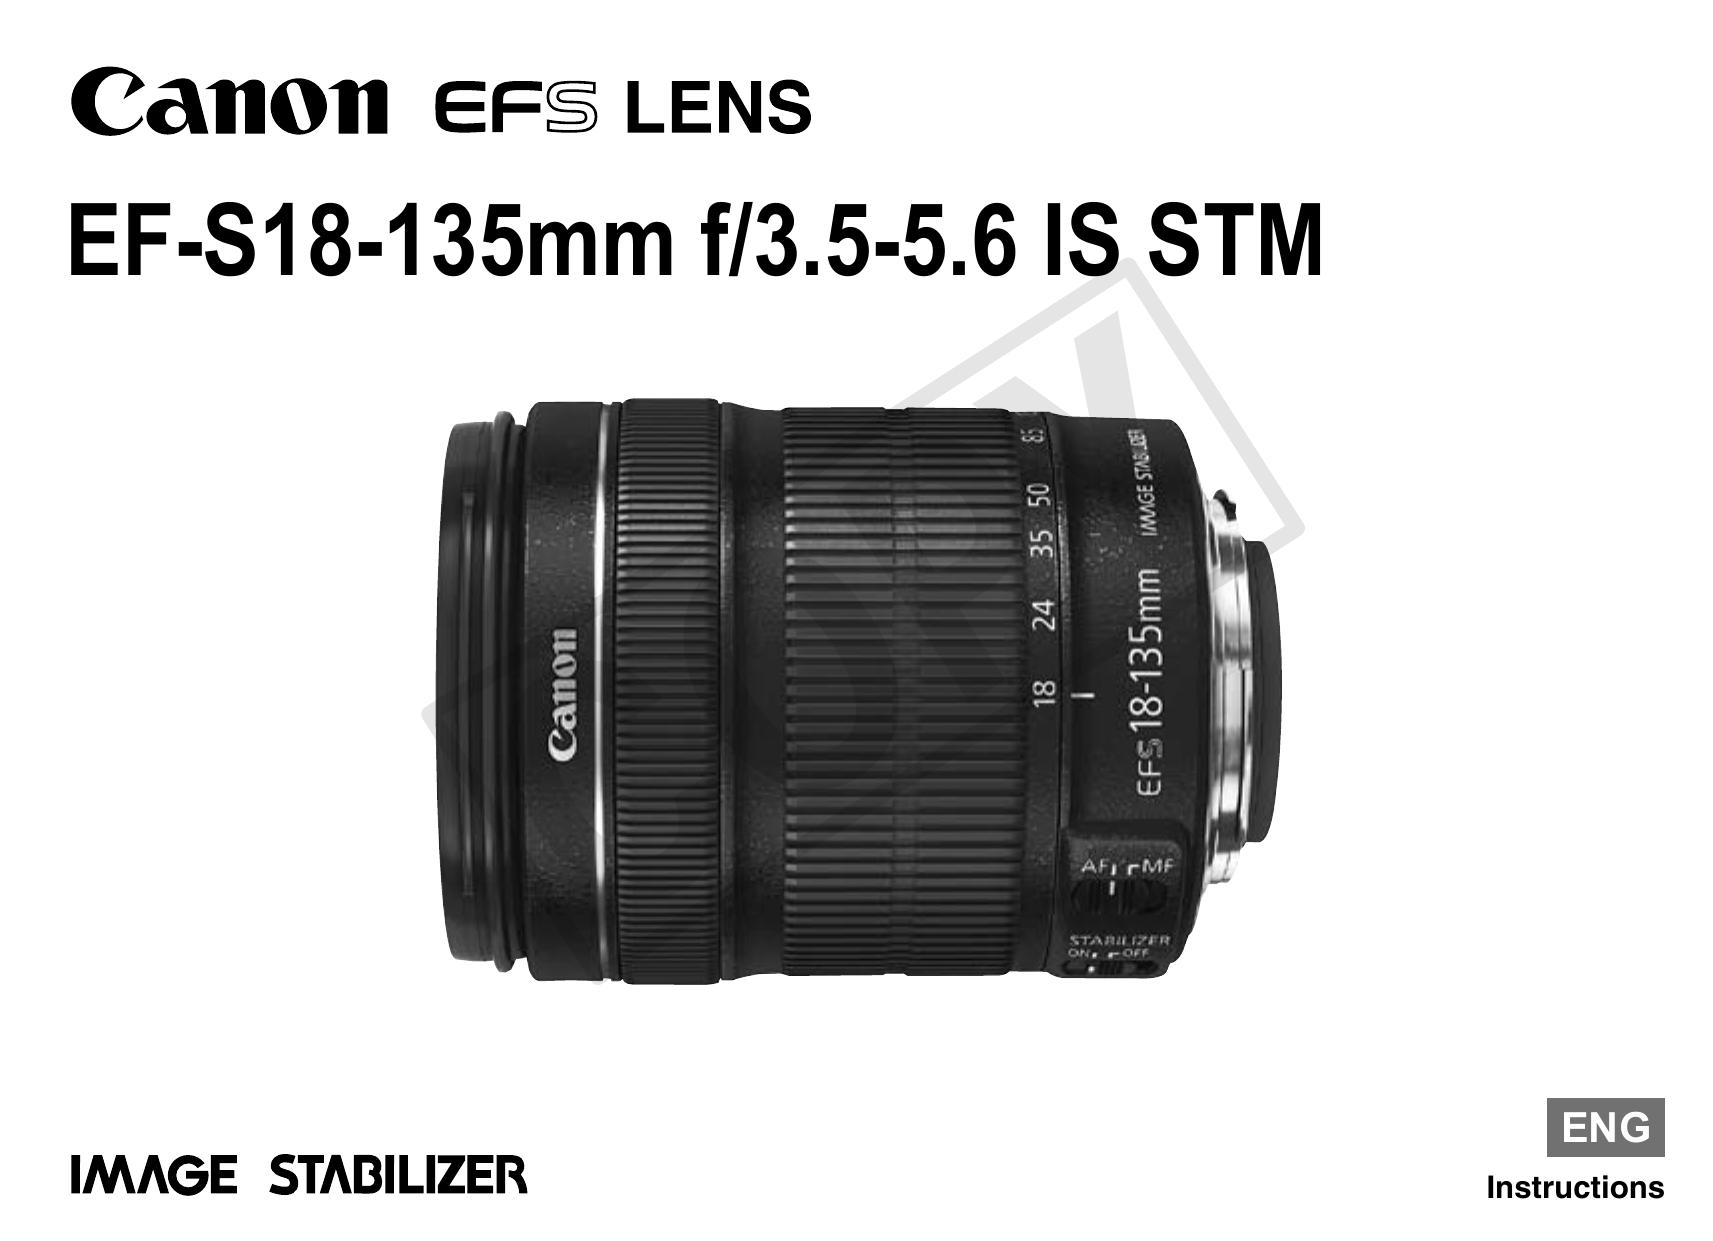 Canon 18-135mm f/3.5-5.6 IS STM Camera Lens User Manual